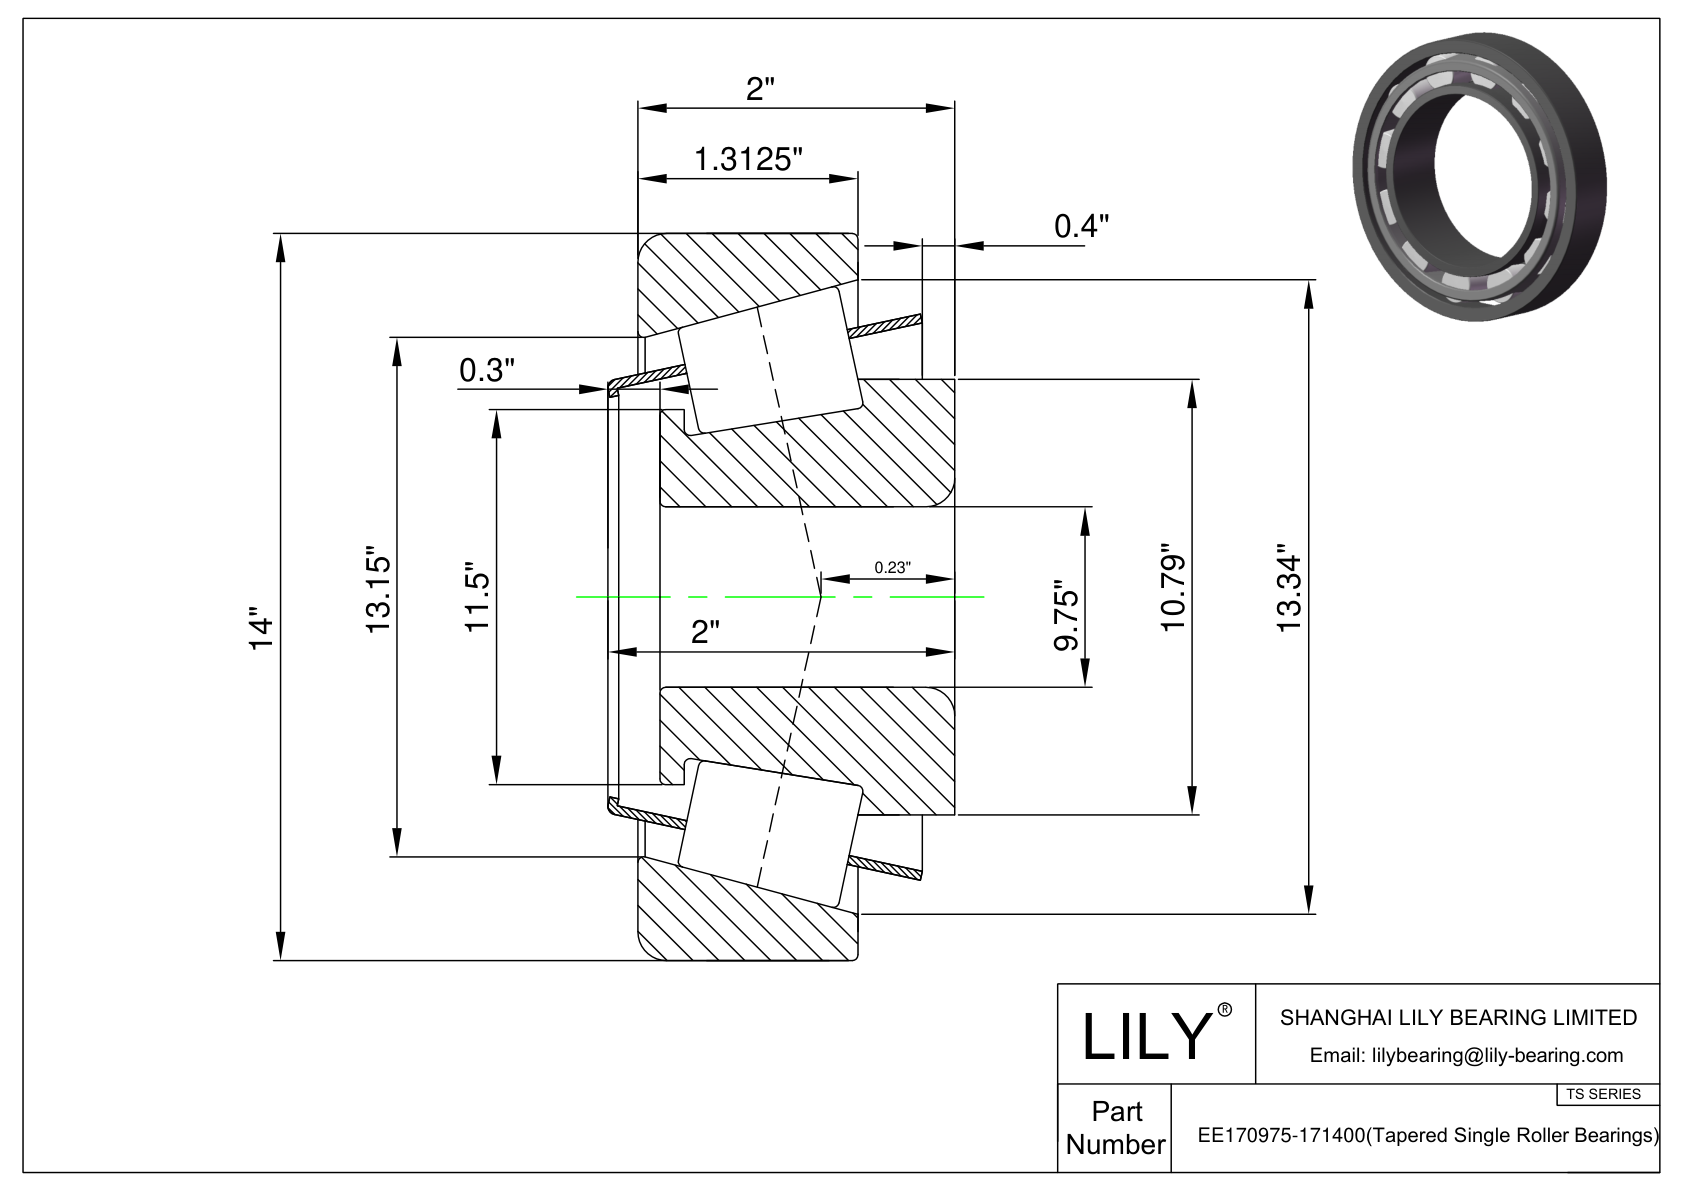 EE170975-171400 TS (Tapered Single Roller Bearings) (Imperial) cad drawing